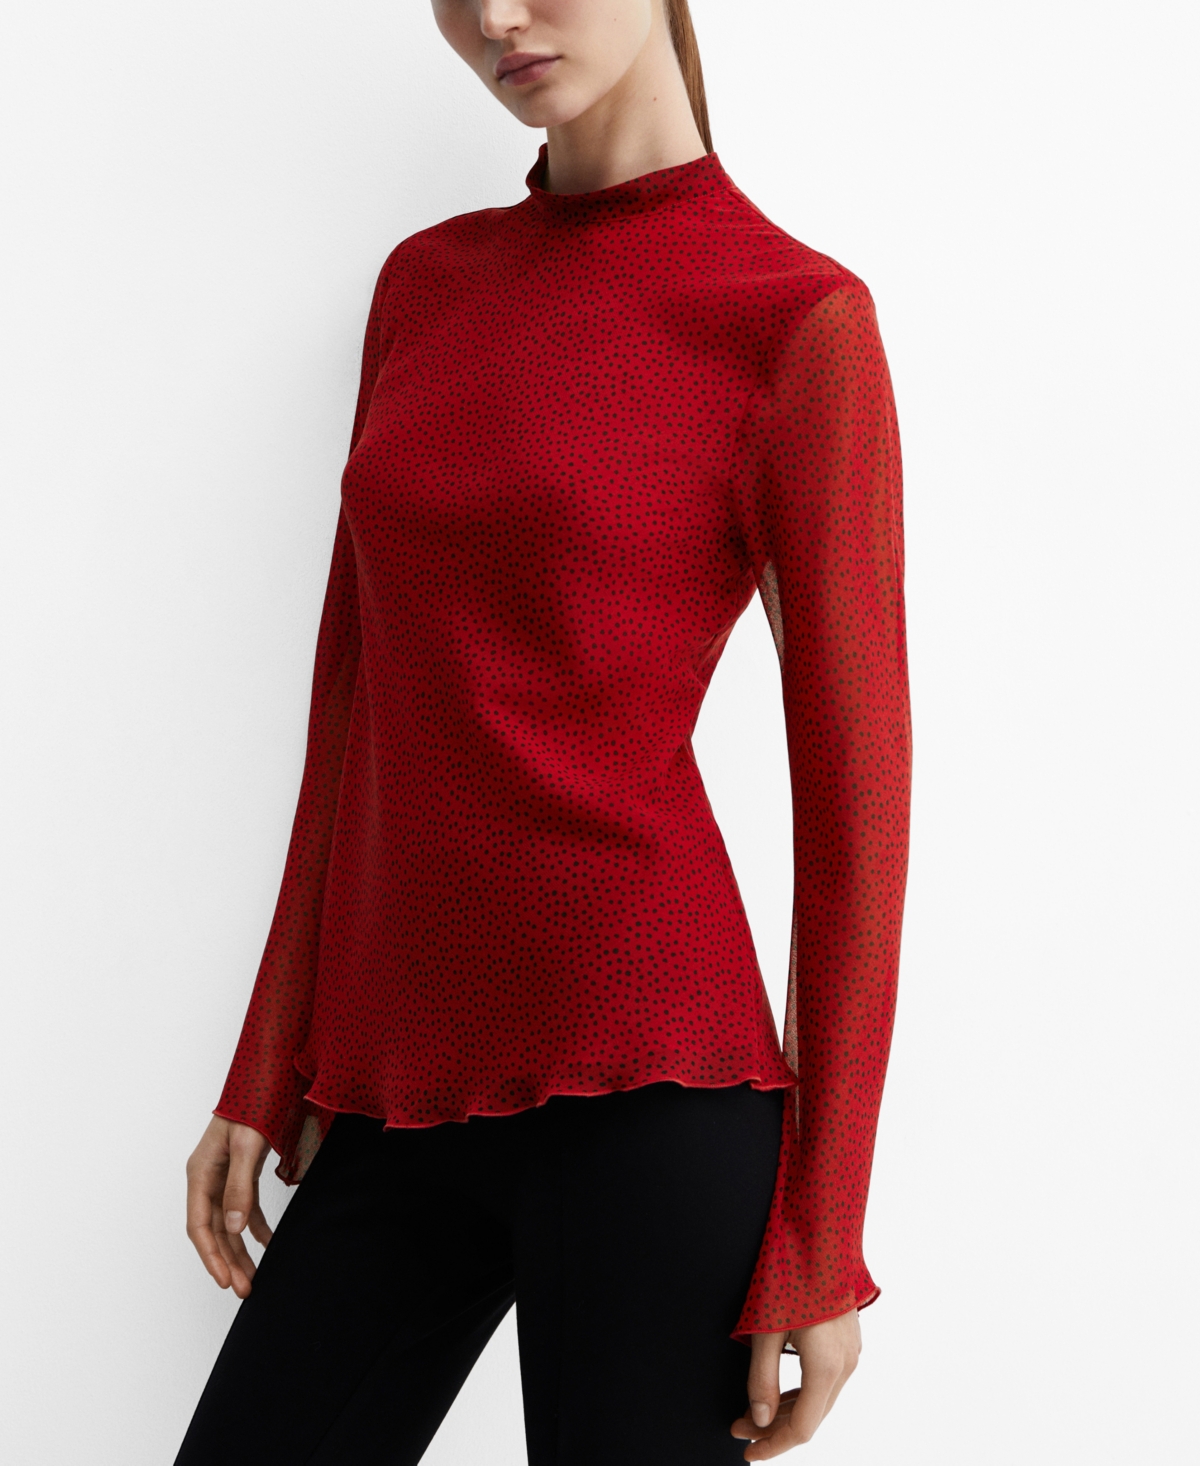 Women's Back Bow Blouse - REd